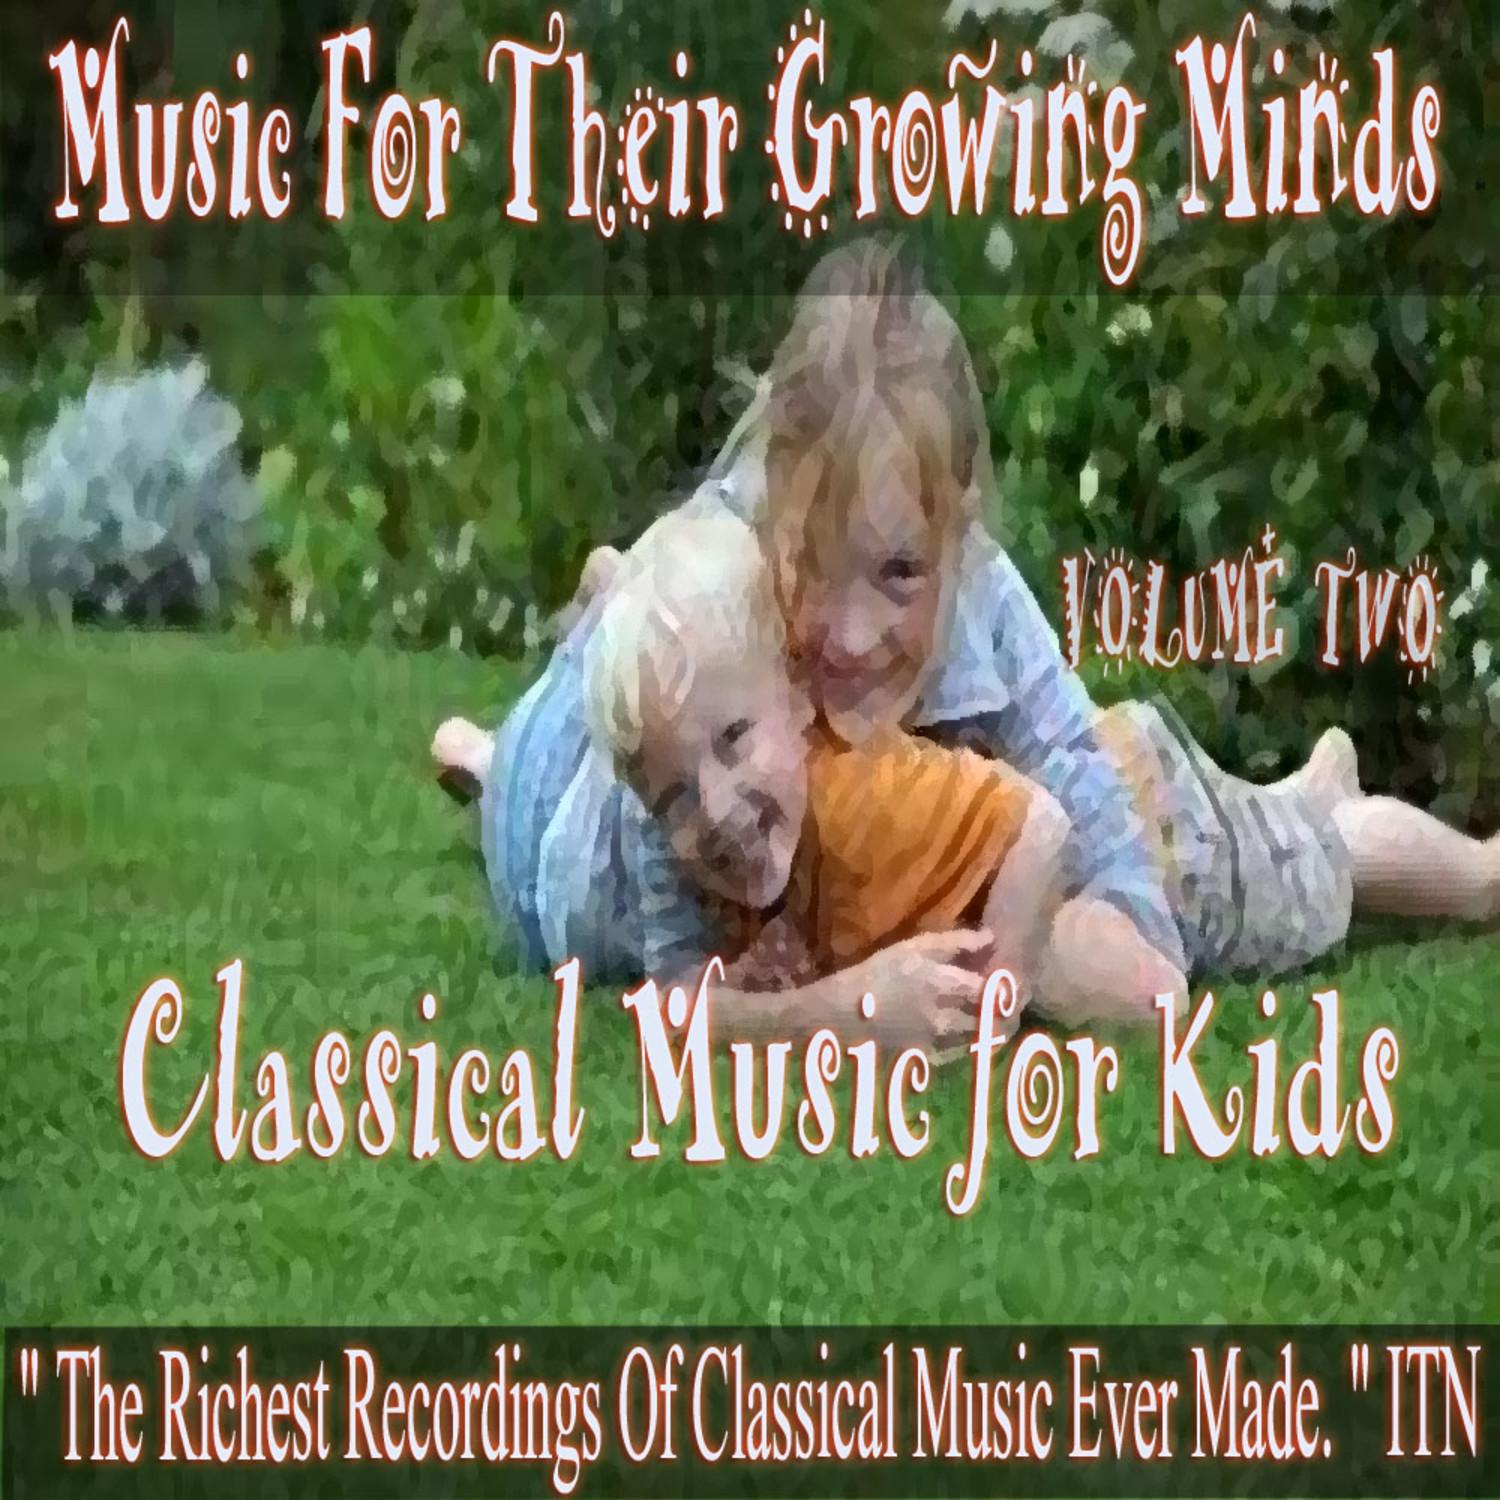 Classical Music For Kids Volume 2